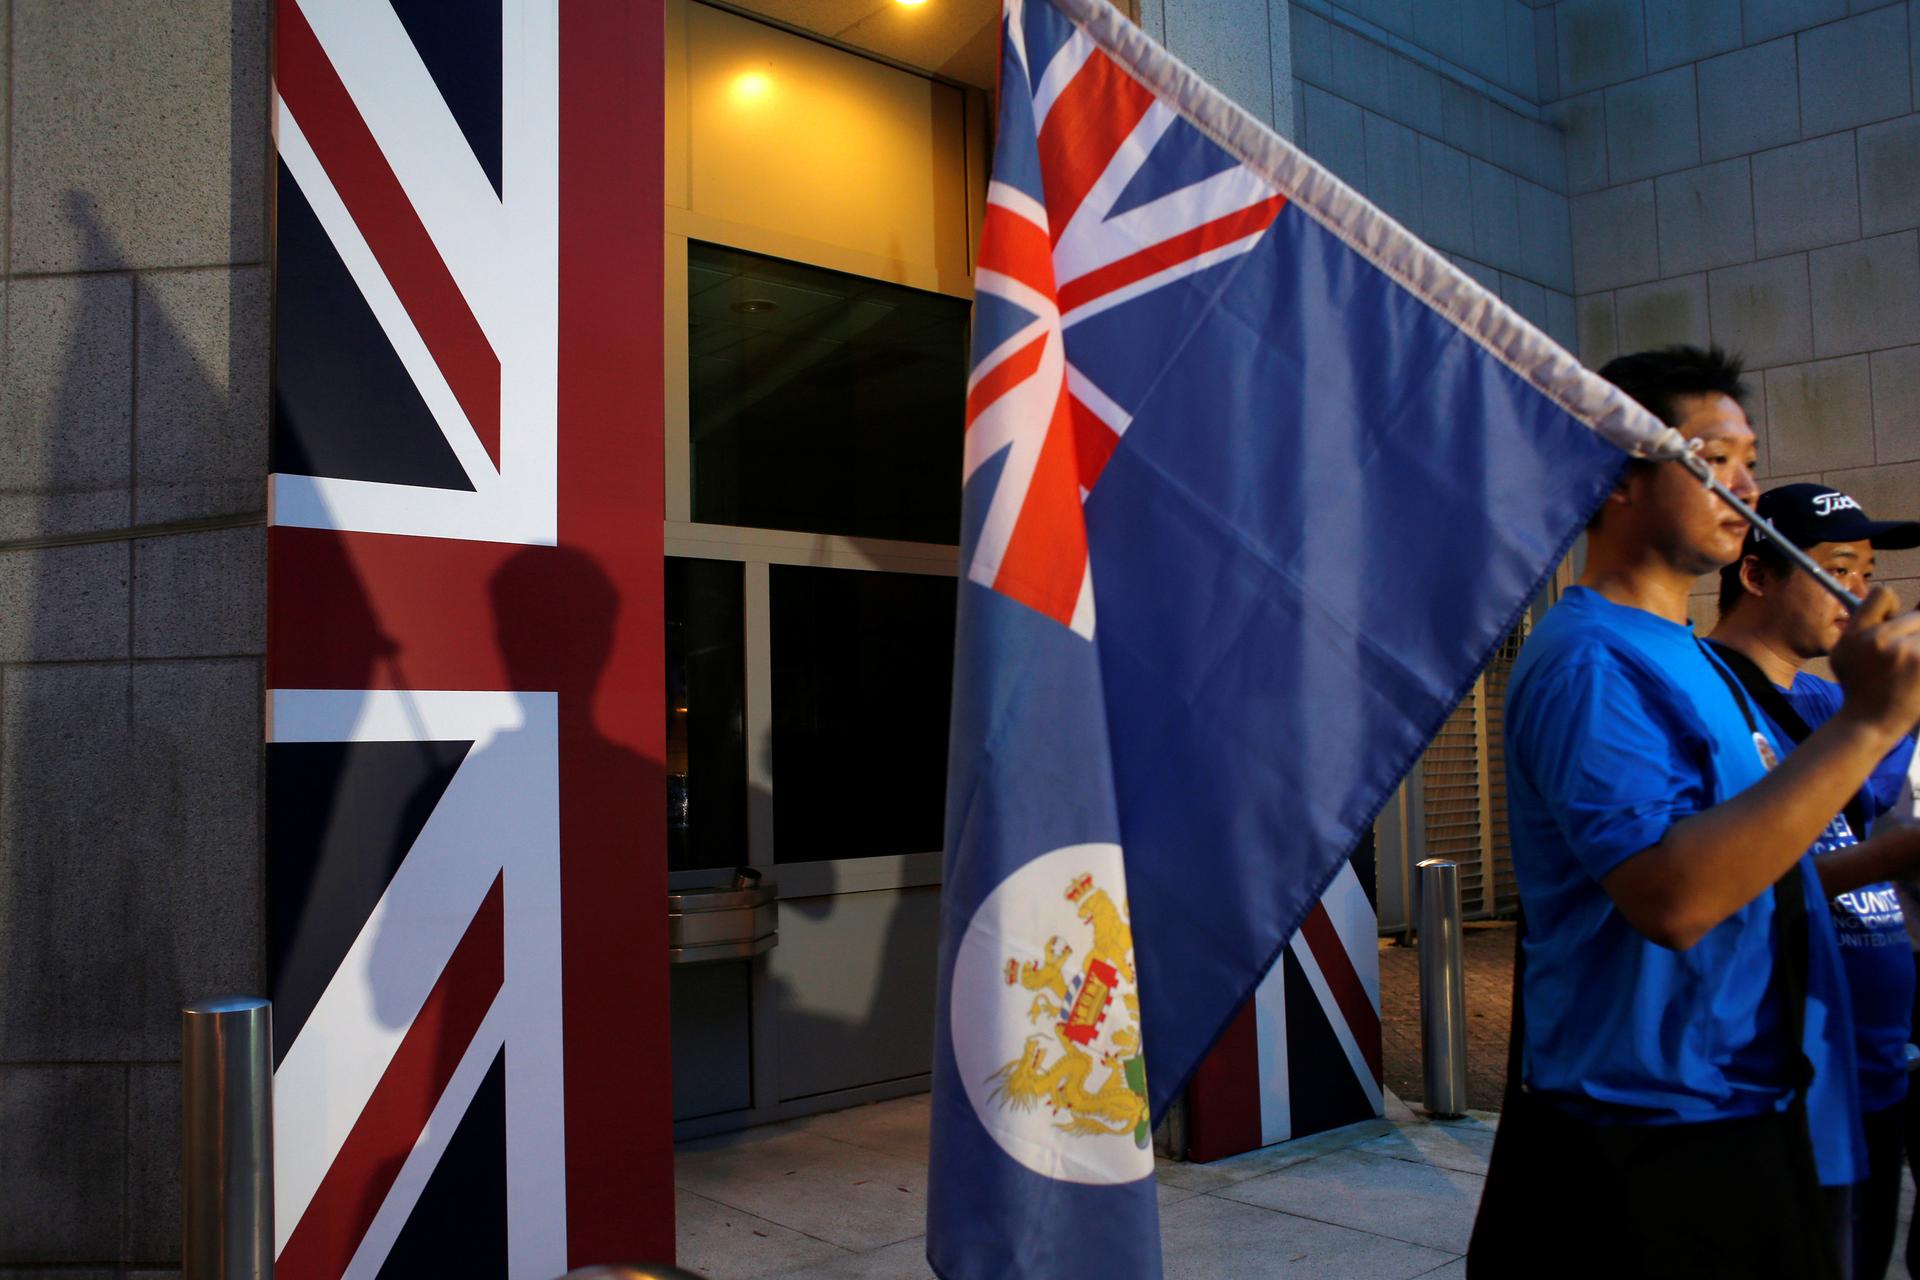 A campaigner carries a former colonial Hong Kong flag during a Hong Kong-UK reunification demonstration outside the British Consulate in Hong Kong on July 1, 2016, the 19th anniversary of Hong Kong's handover to Chinese sovereignty from British rule.